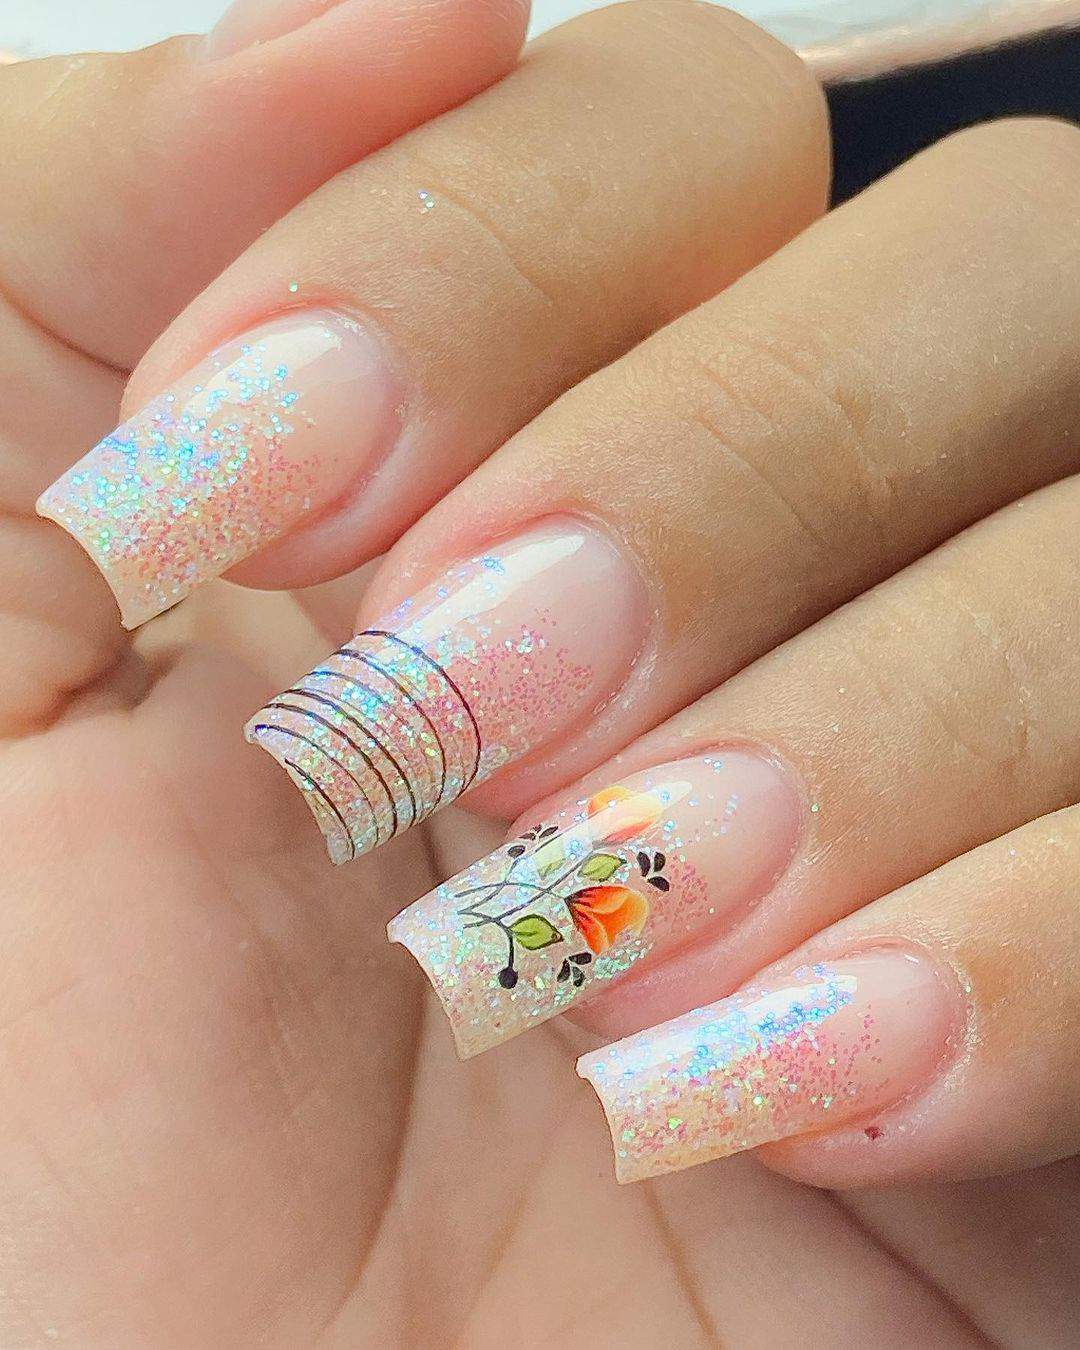 The 100+ Best Nail Designs Trends And Ideas In 2021 images 84